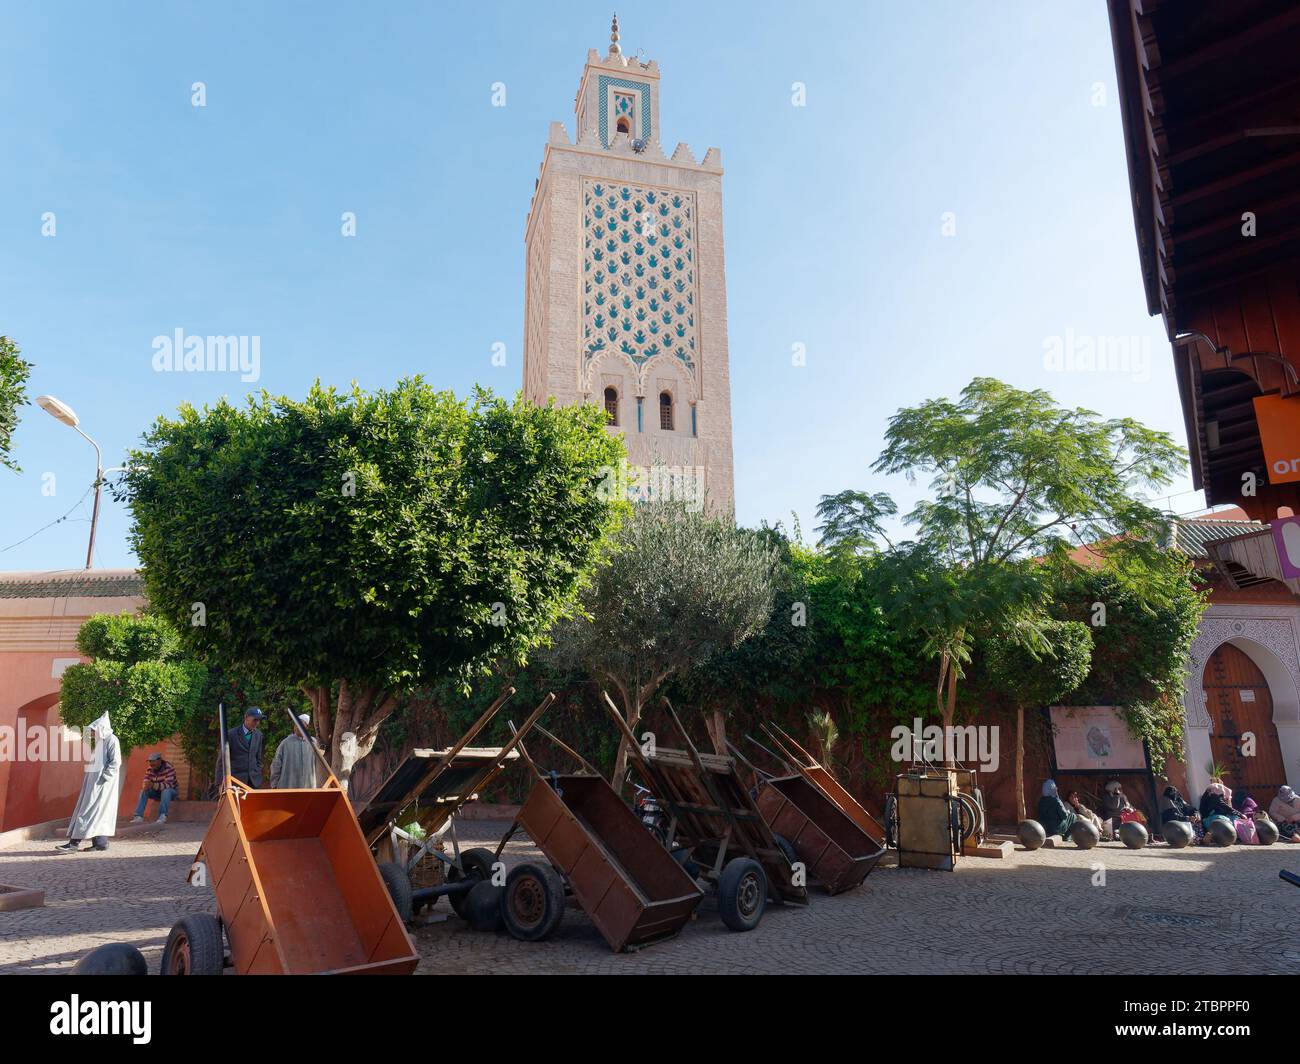 Wooden carts used for carrying goods beside trees, in front of a Mosque in Marrakesh aka Marrakech, Morocco, December 08, 2023 Stock Photo